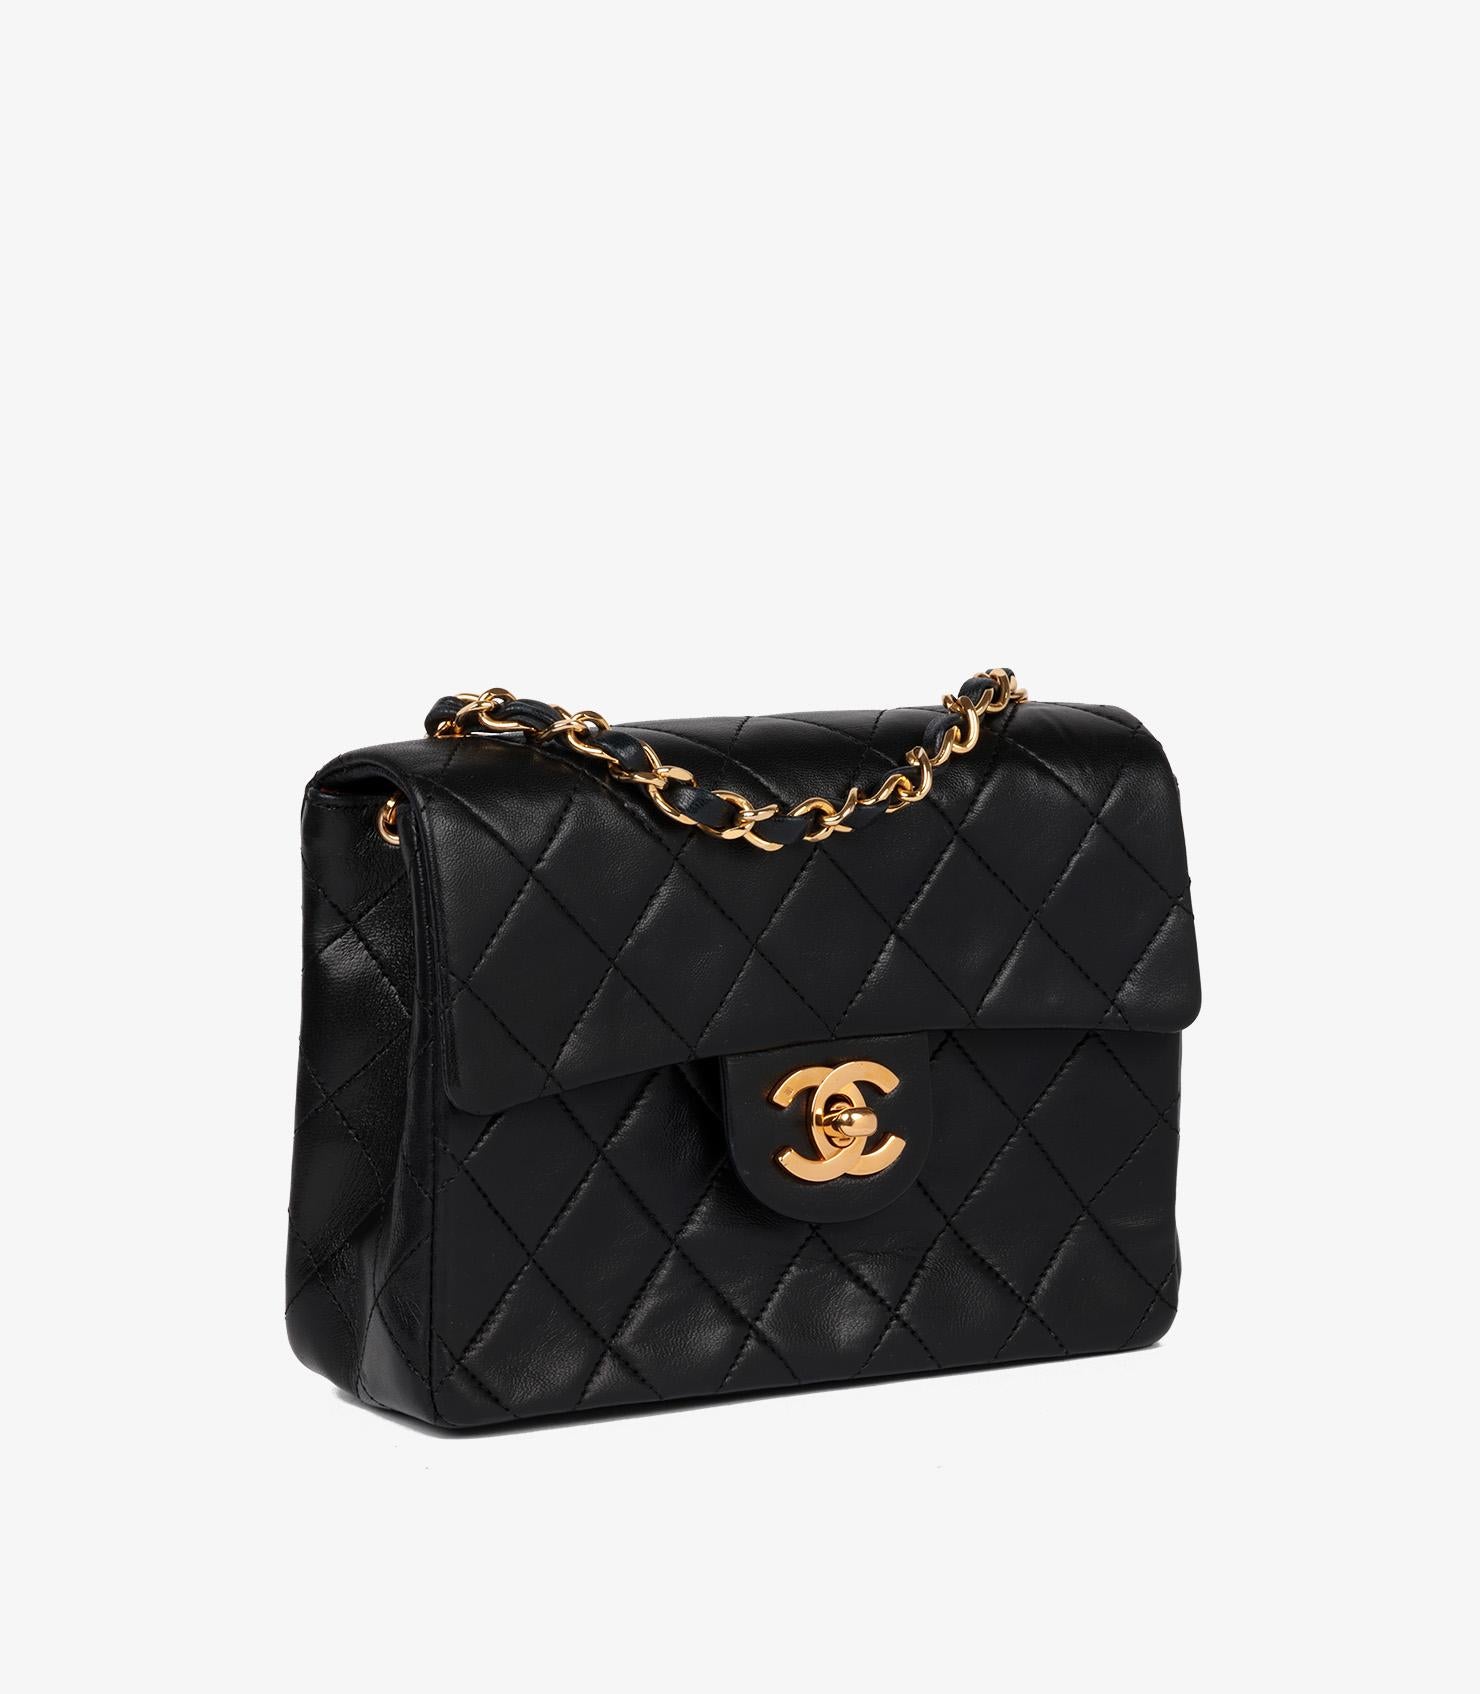 Chanel Black Quilted Lambskin Vintage Square Classic Mini Flap Bag

Brand- Chanel
Model- Square Mini Flap Bag
Product Type- Crossbody, Shoulder
Serial Number- 98*****
Age- Circa 1988
Accompanied By- Chanel Dust Bag, Authenticity Card
Colour-